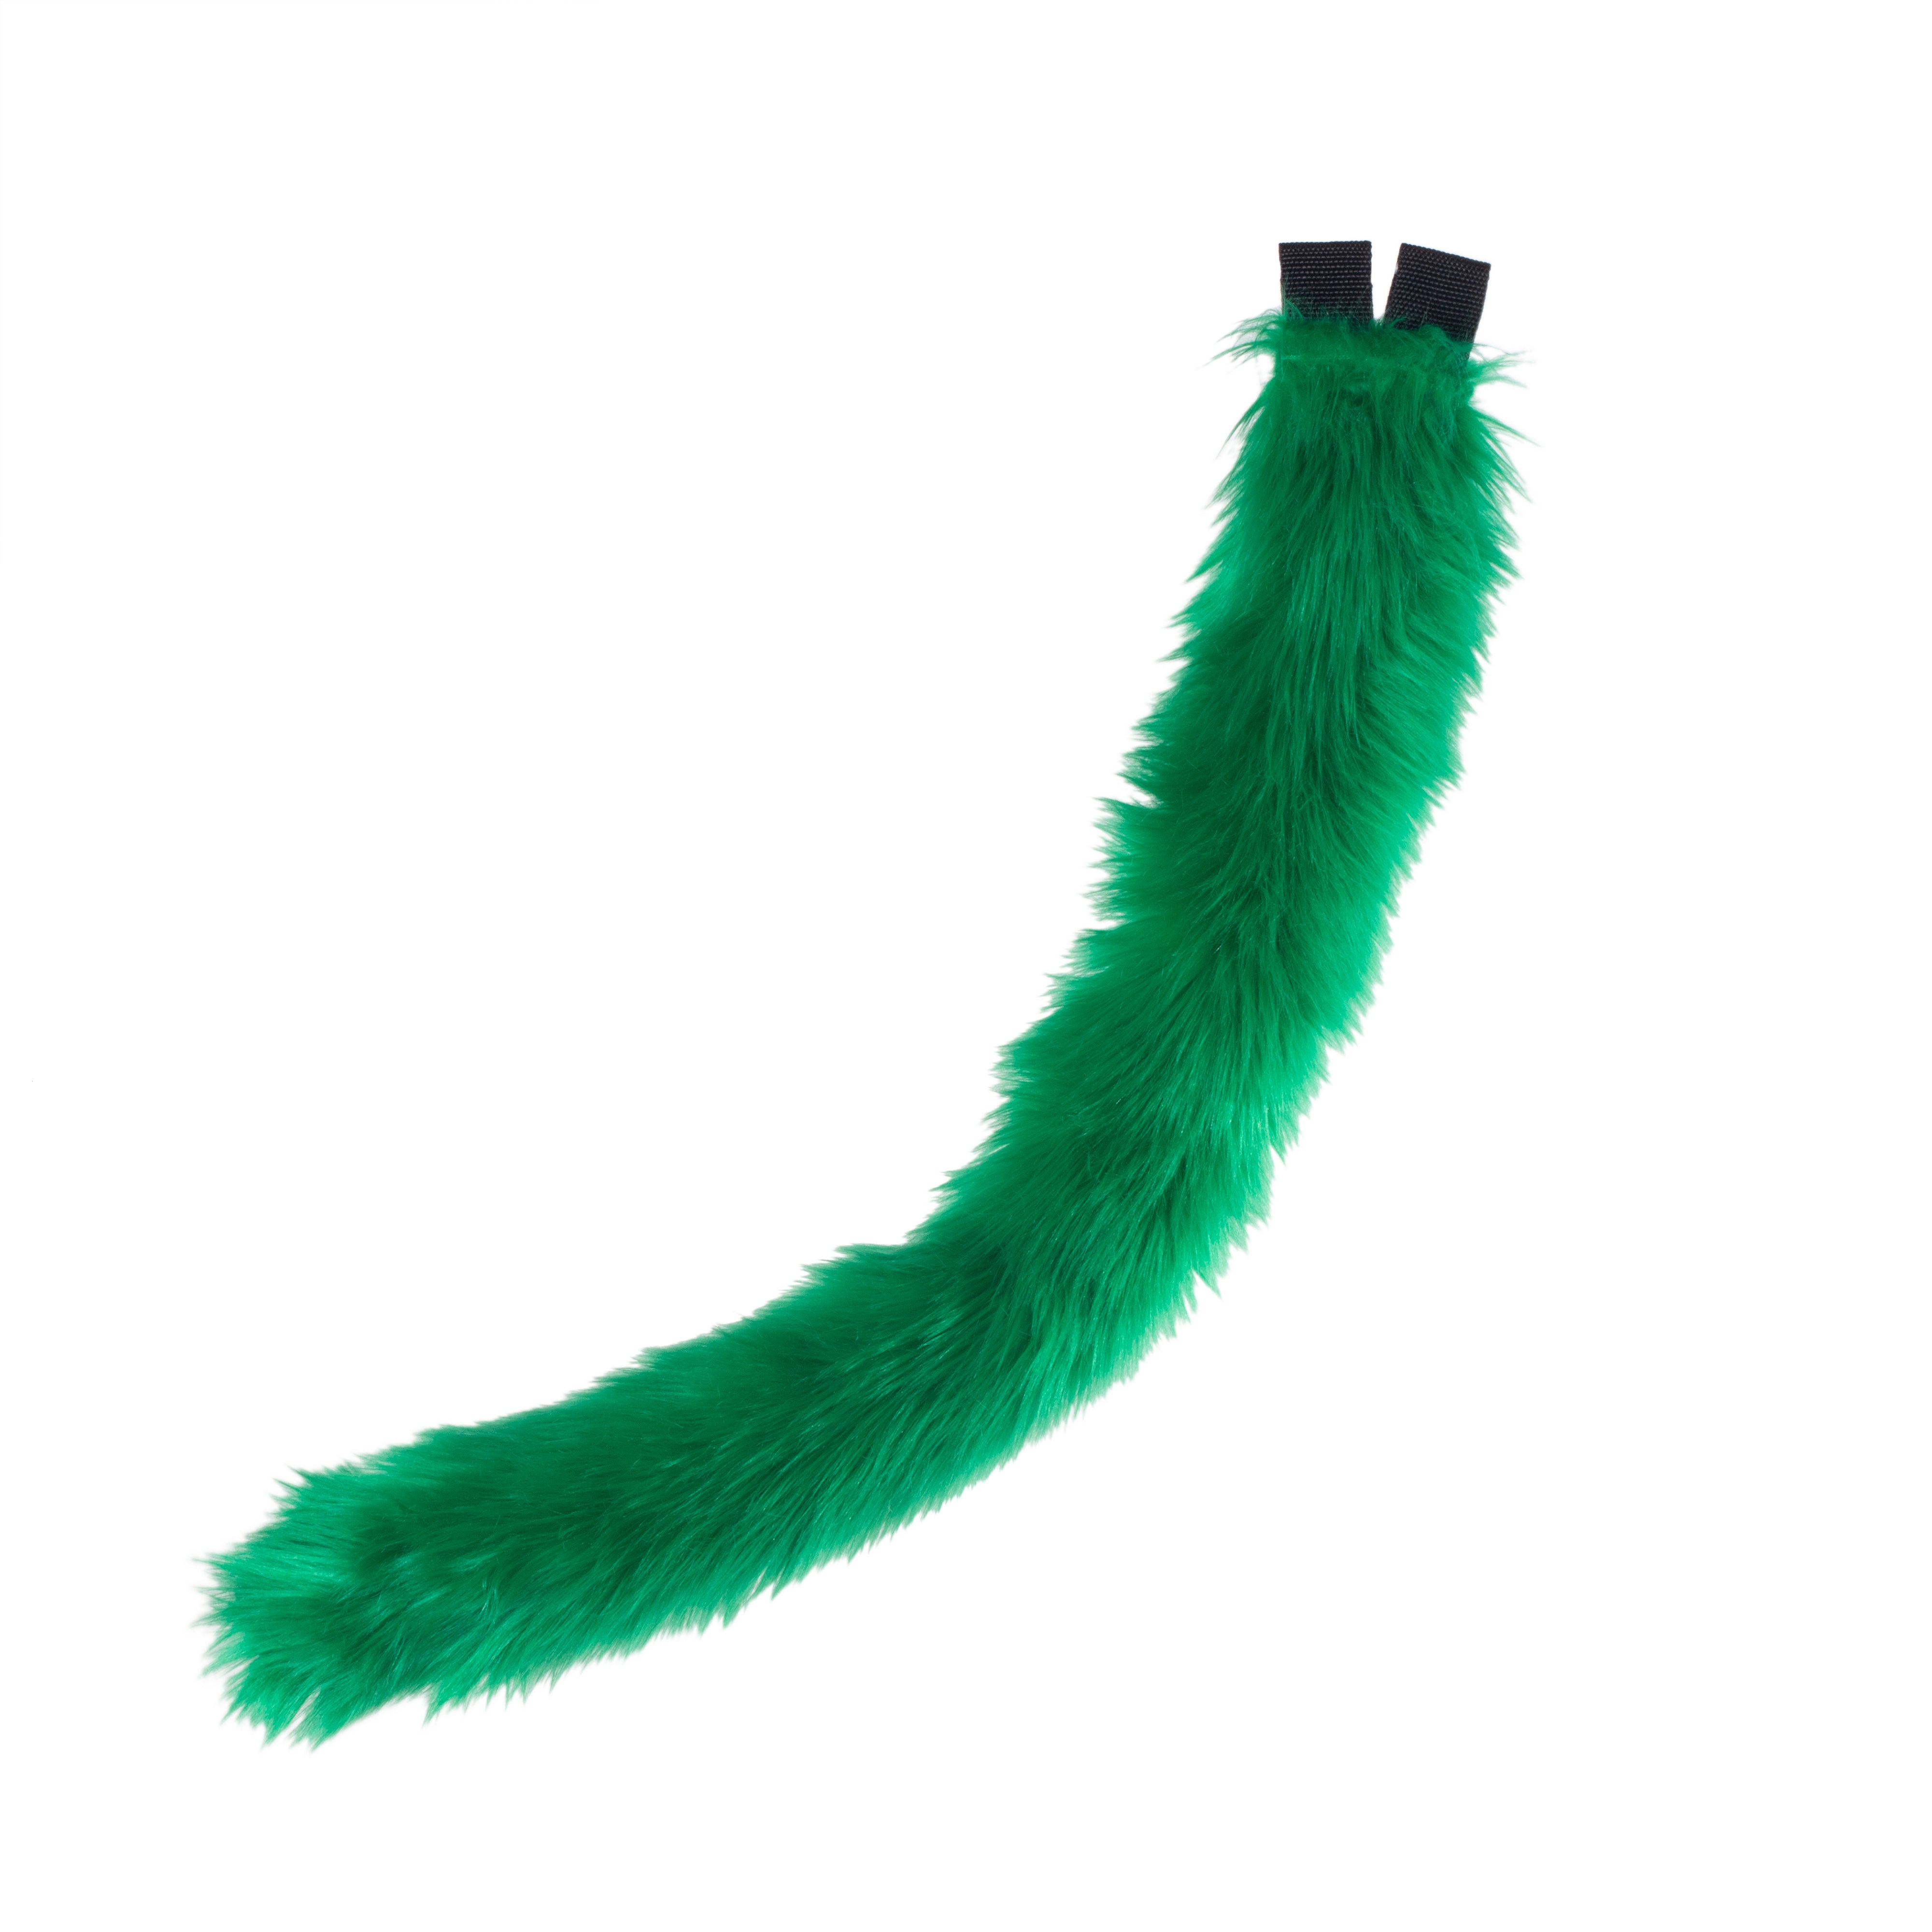 green kitty cat feline costume tail made of faux fur. Fluffy furry and perfect for Halloween.